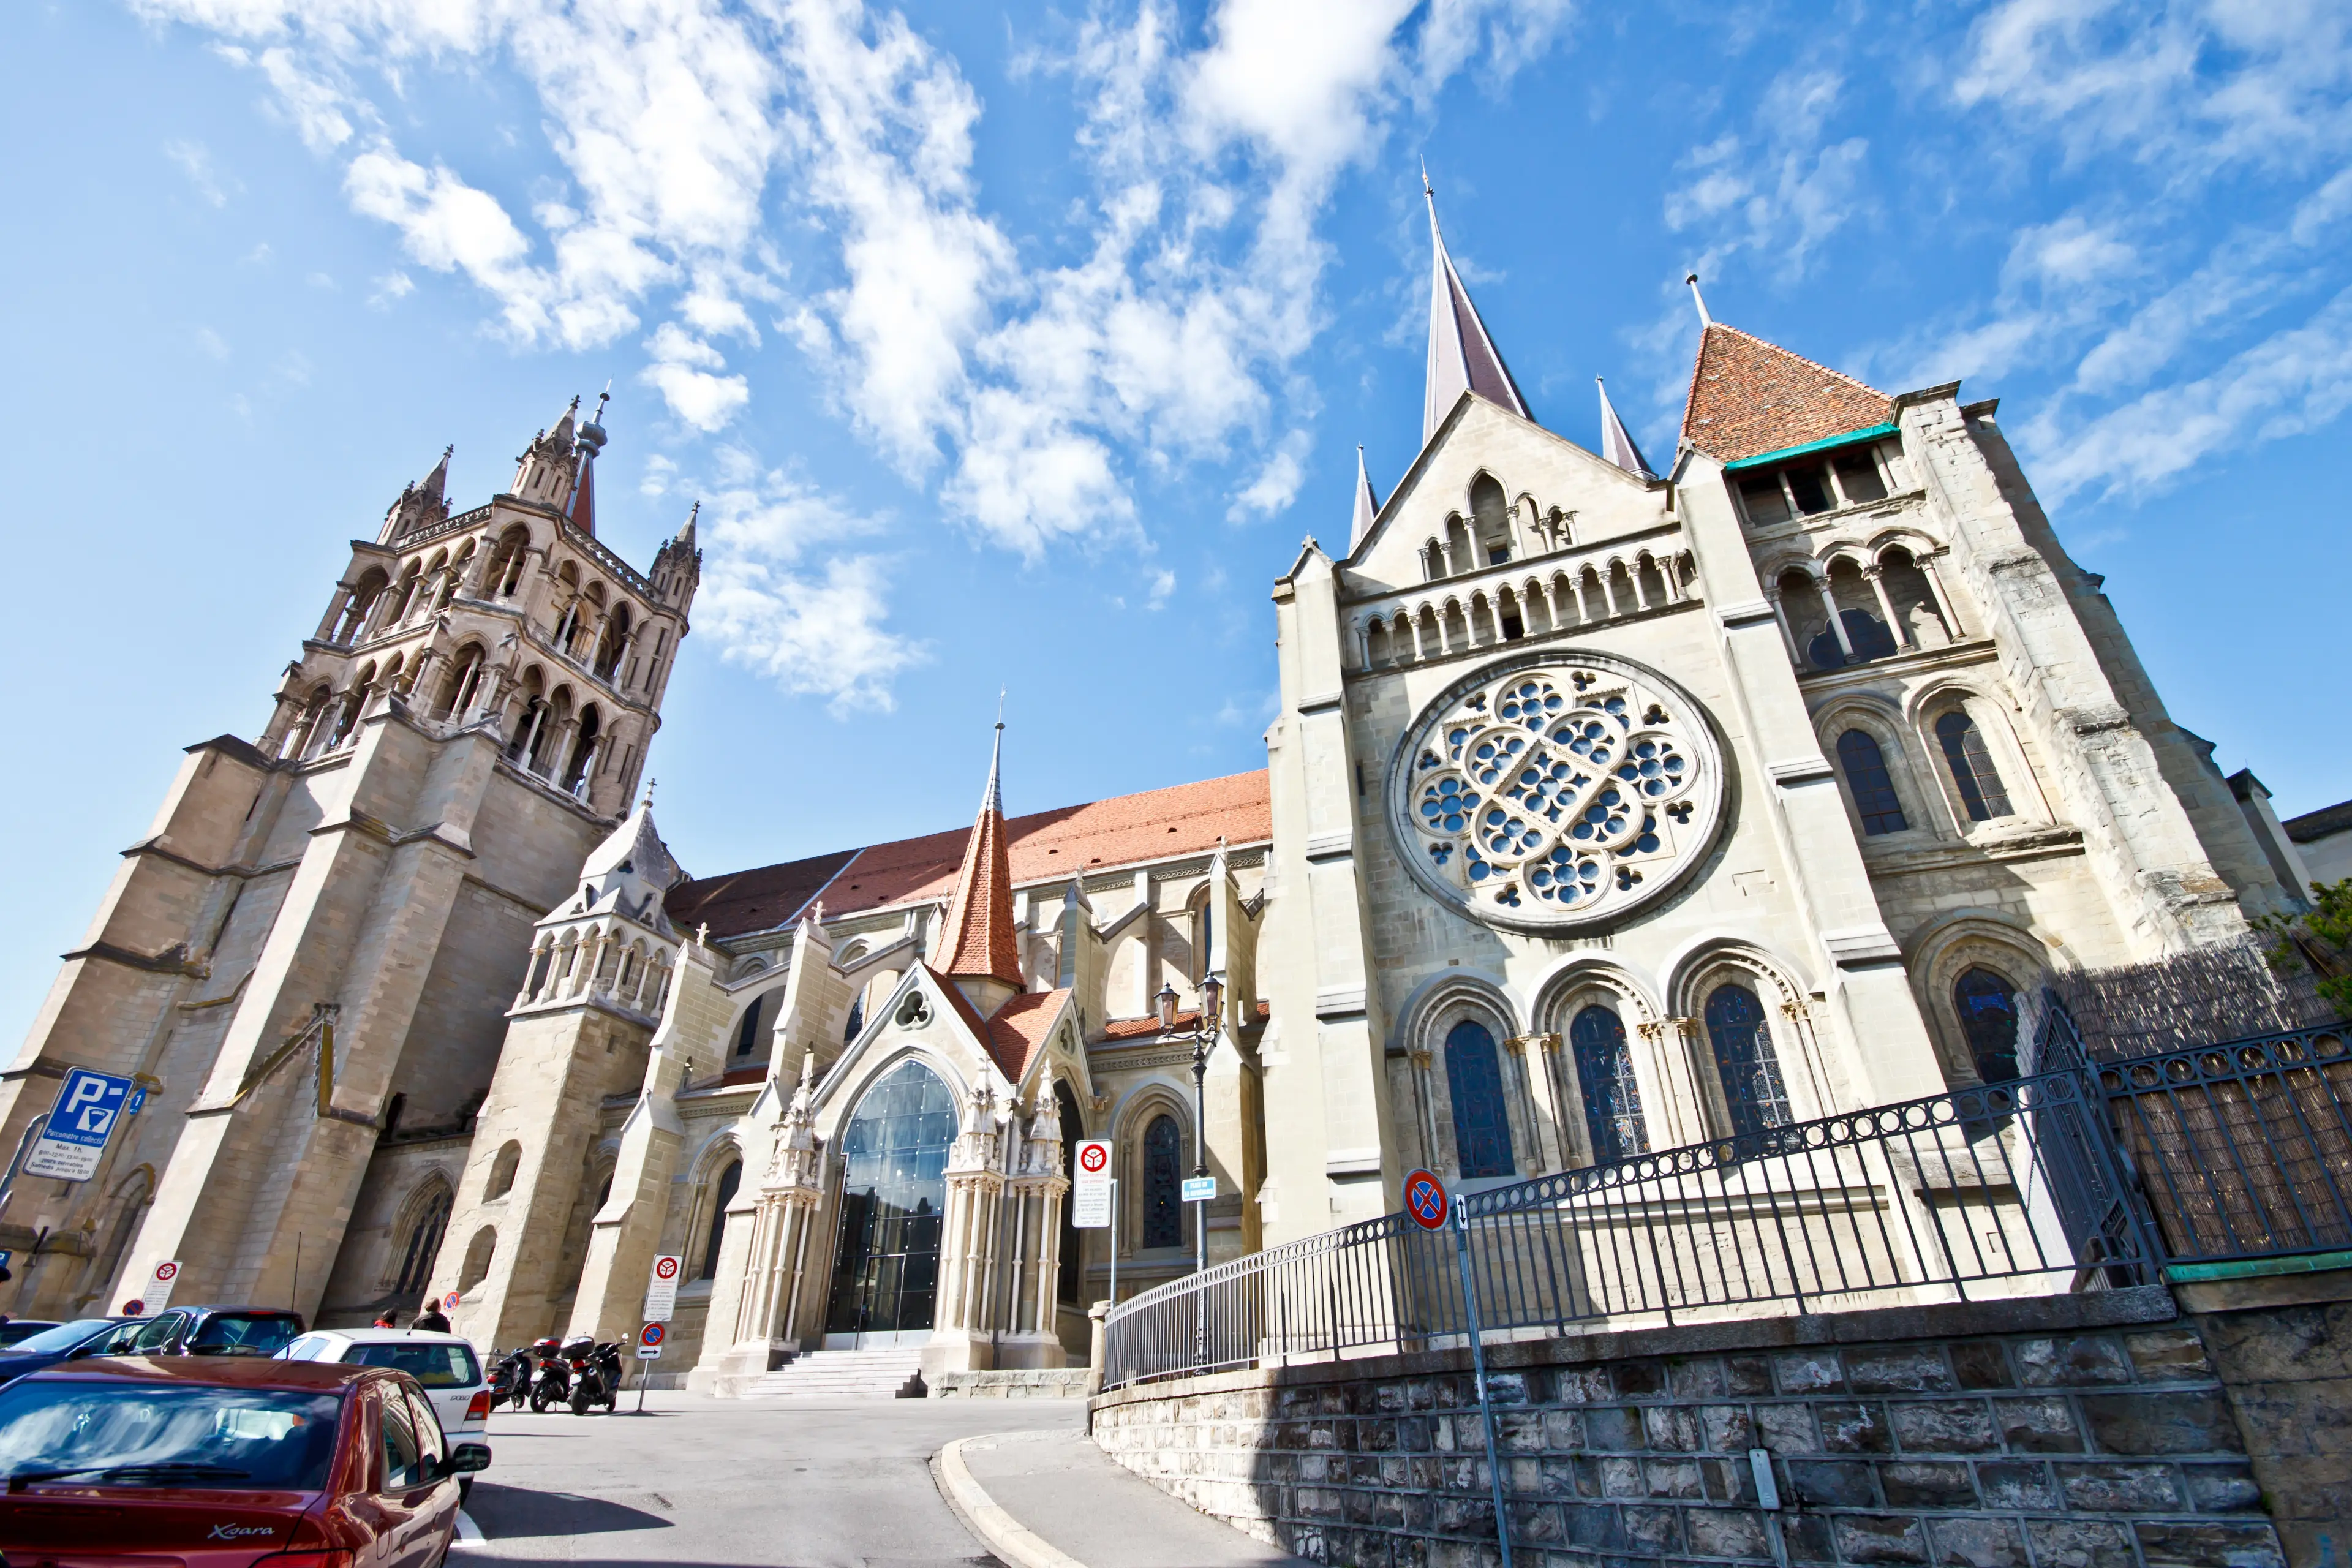 3-Day Lausanne Adventure: Sightseeing and Nightlife with Friends